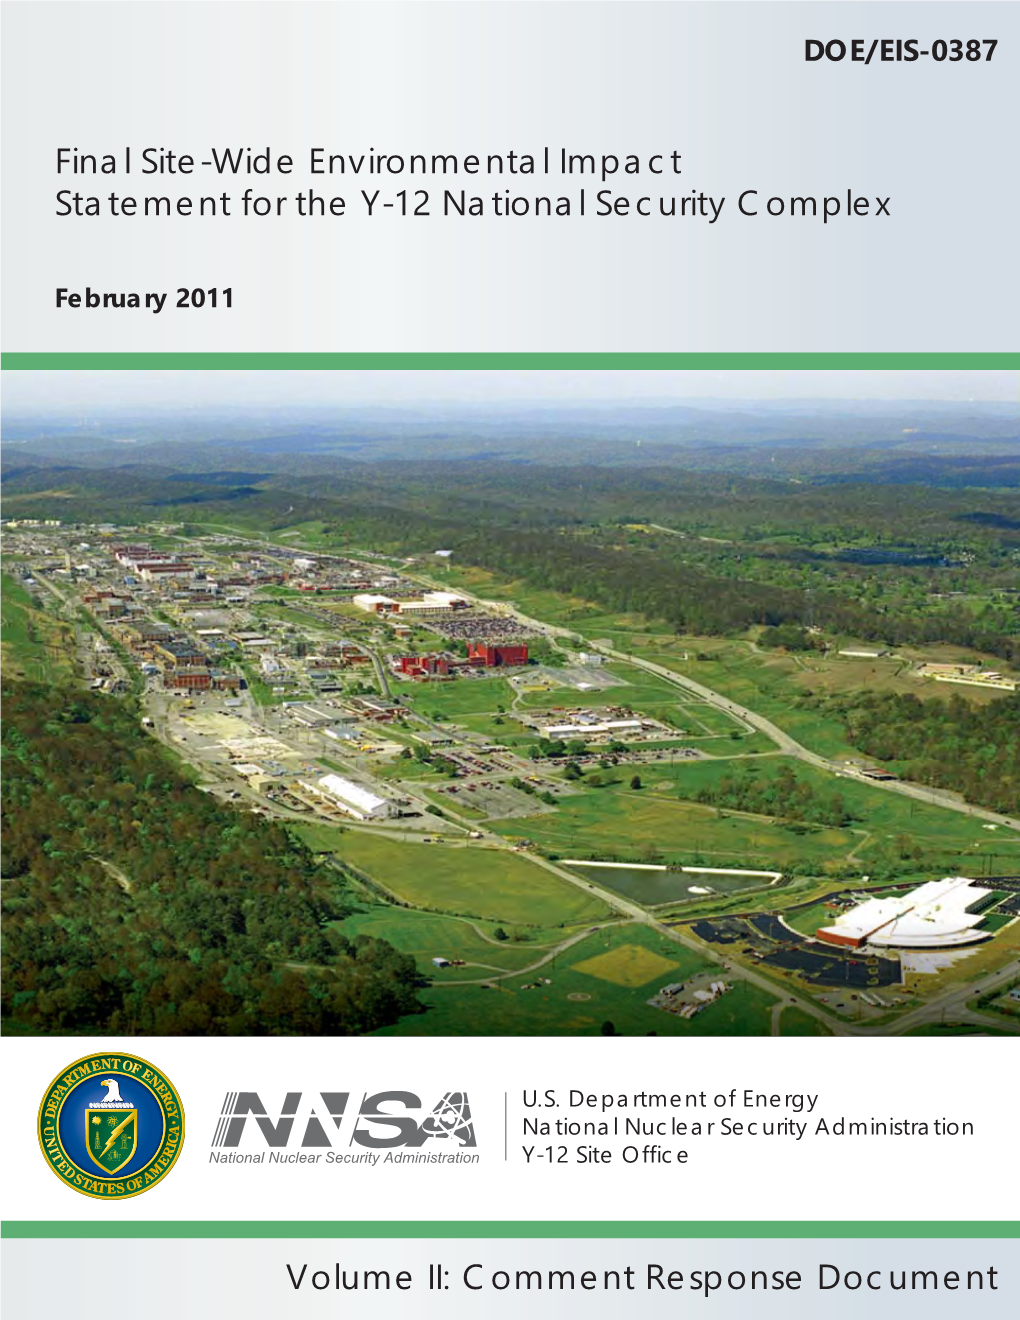 Final Site-Wide Environmental Impact Statement for the Y-12 National Security Complex